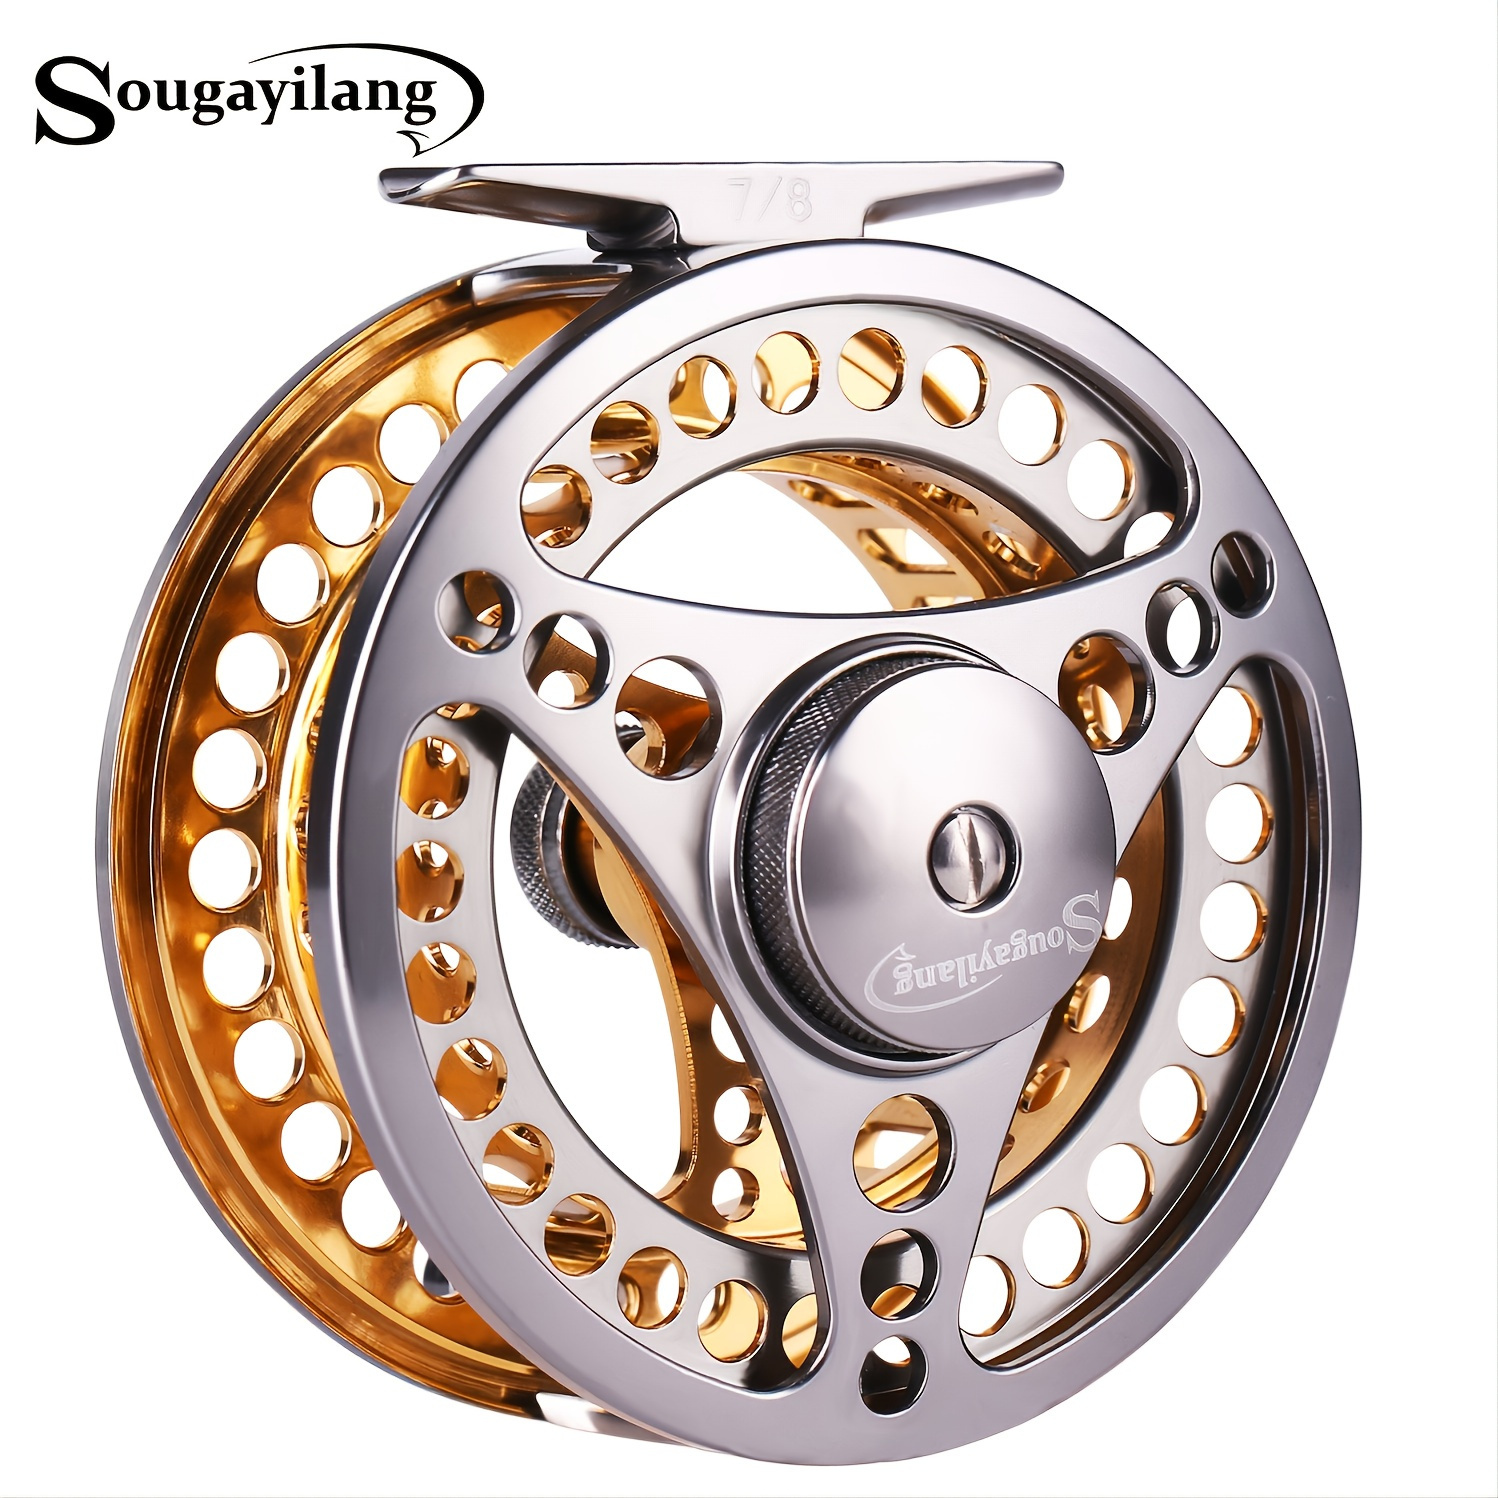 

Sougayilang Lightweight Aluminium Fly Fishing Reel With Smooth Drag System